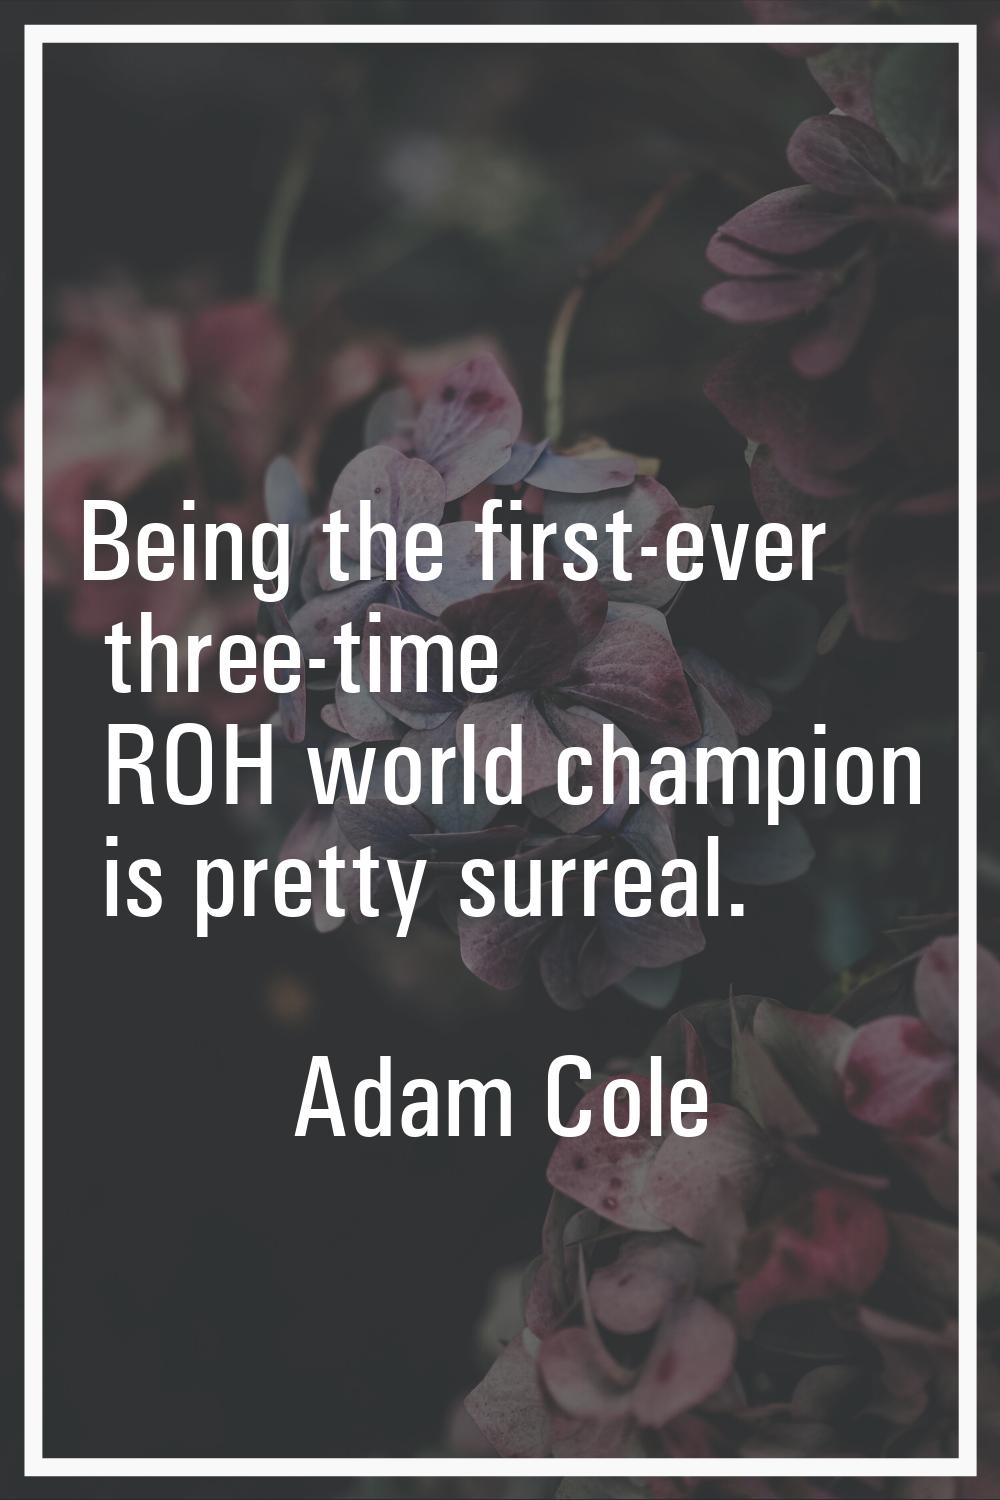 Being the first-ever three-time ROH world champion is pretty surreal.